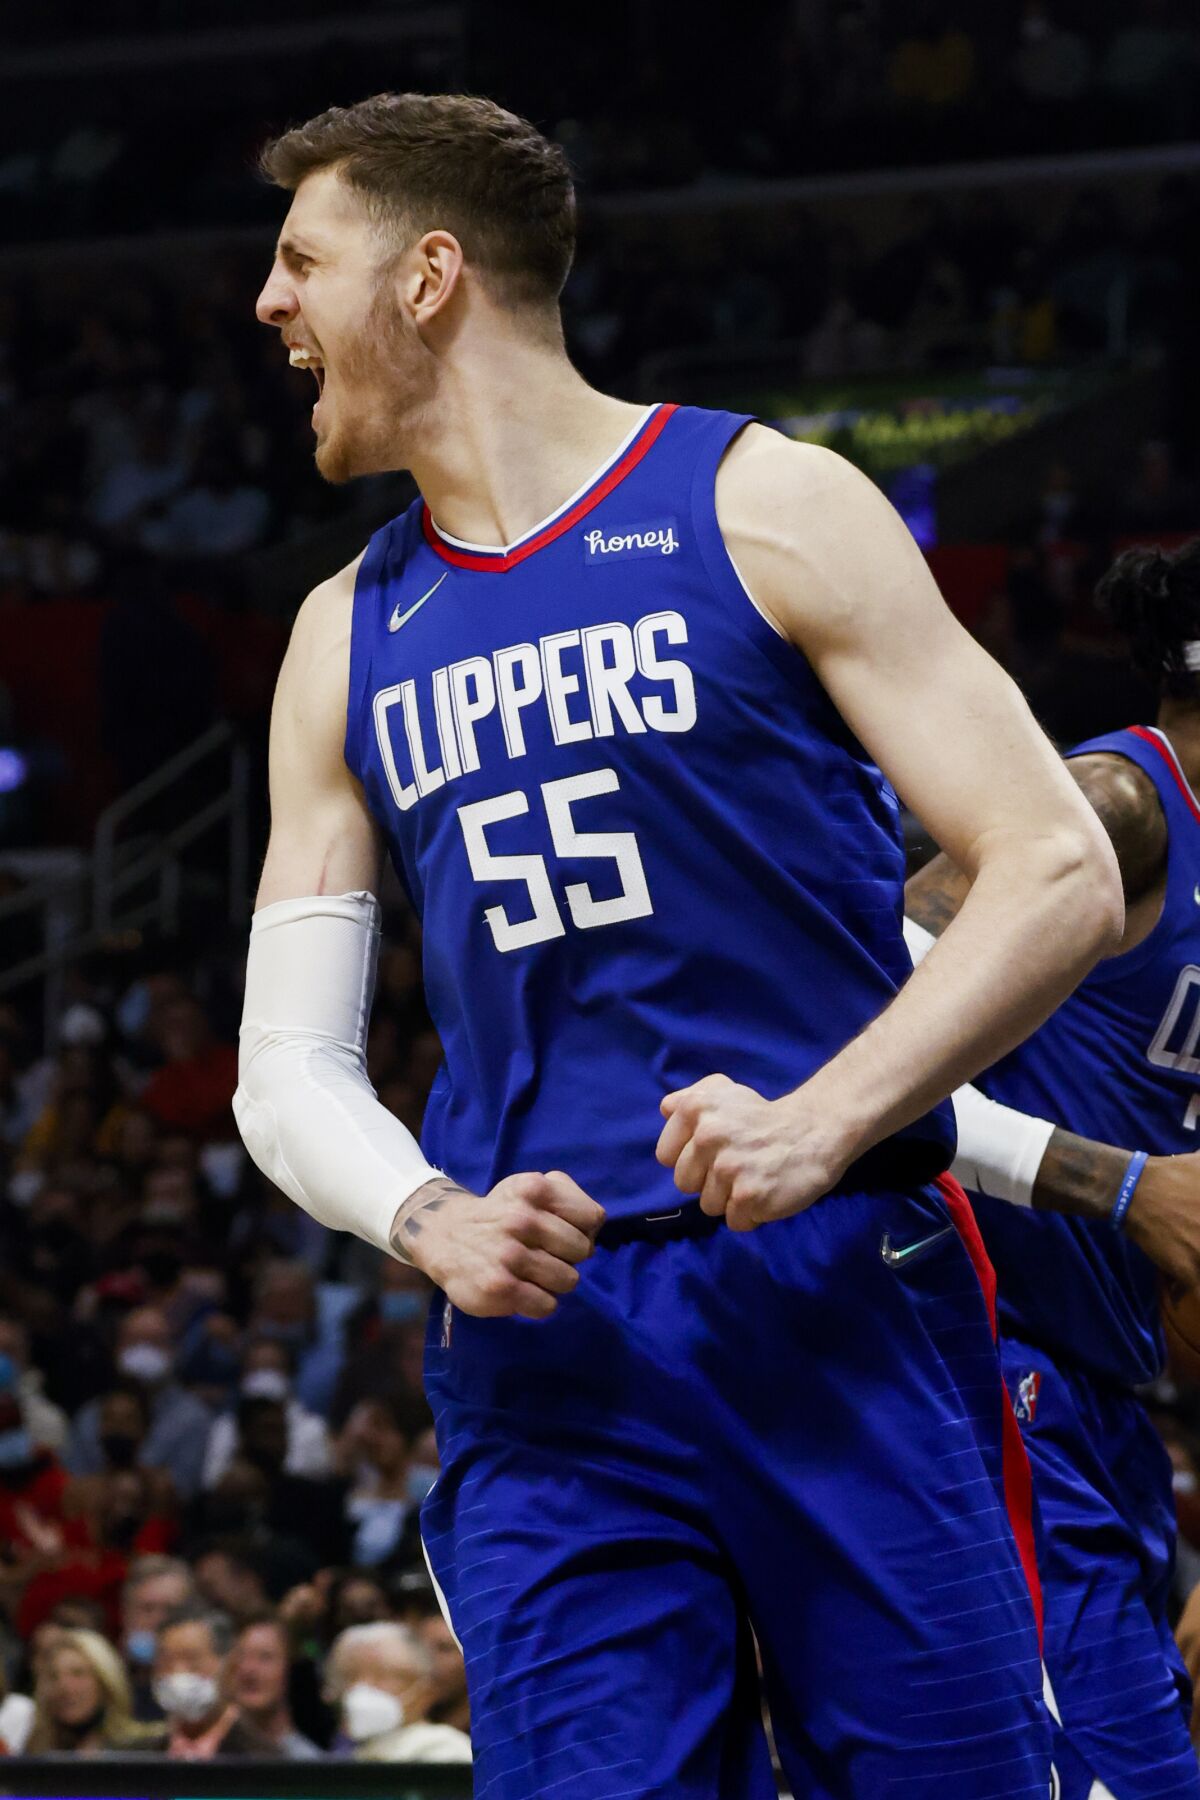 Clippers center Isaiah Hartenstein reacts after a play.